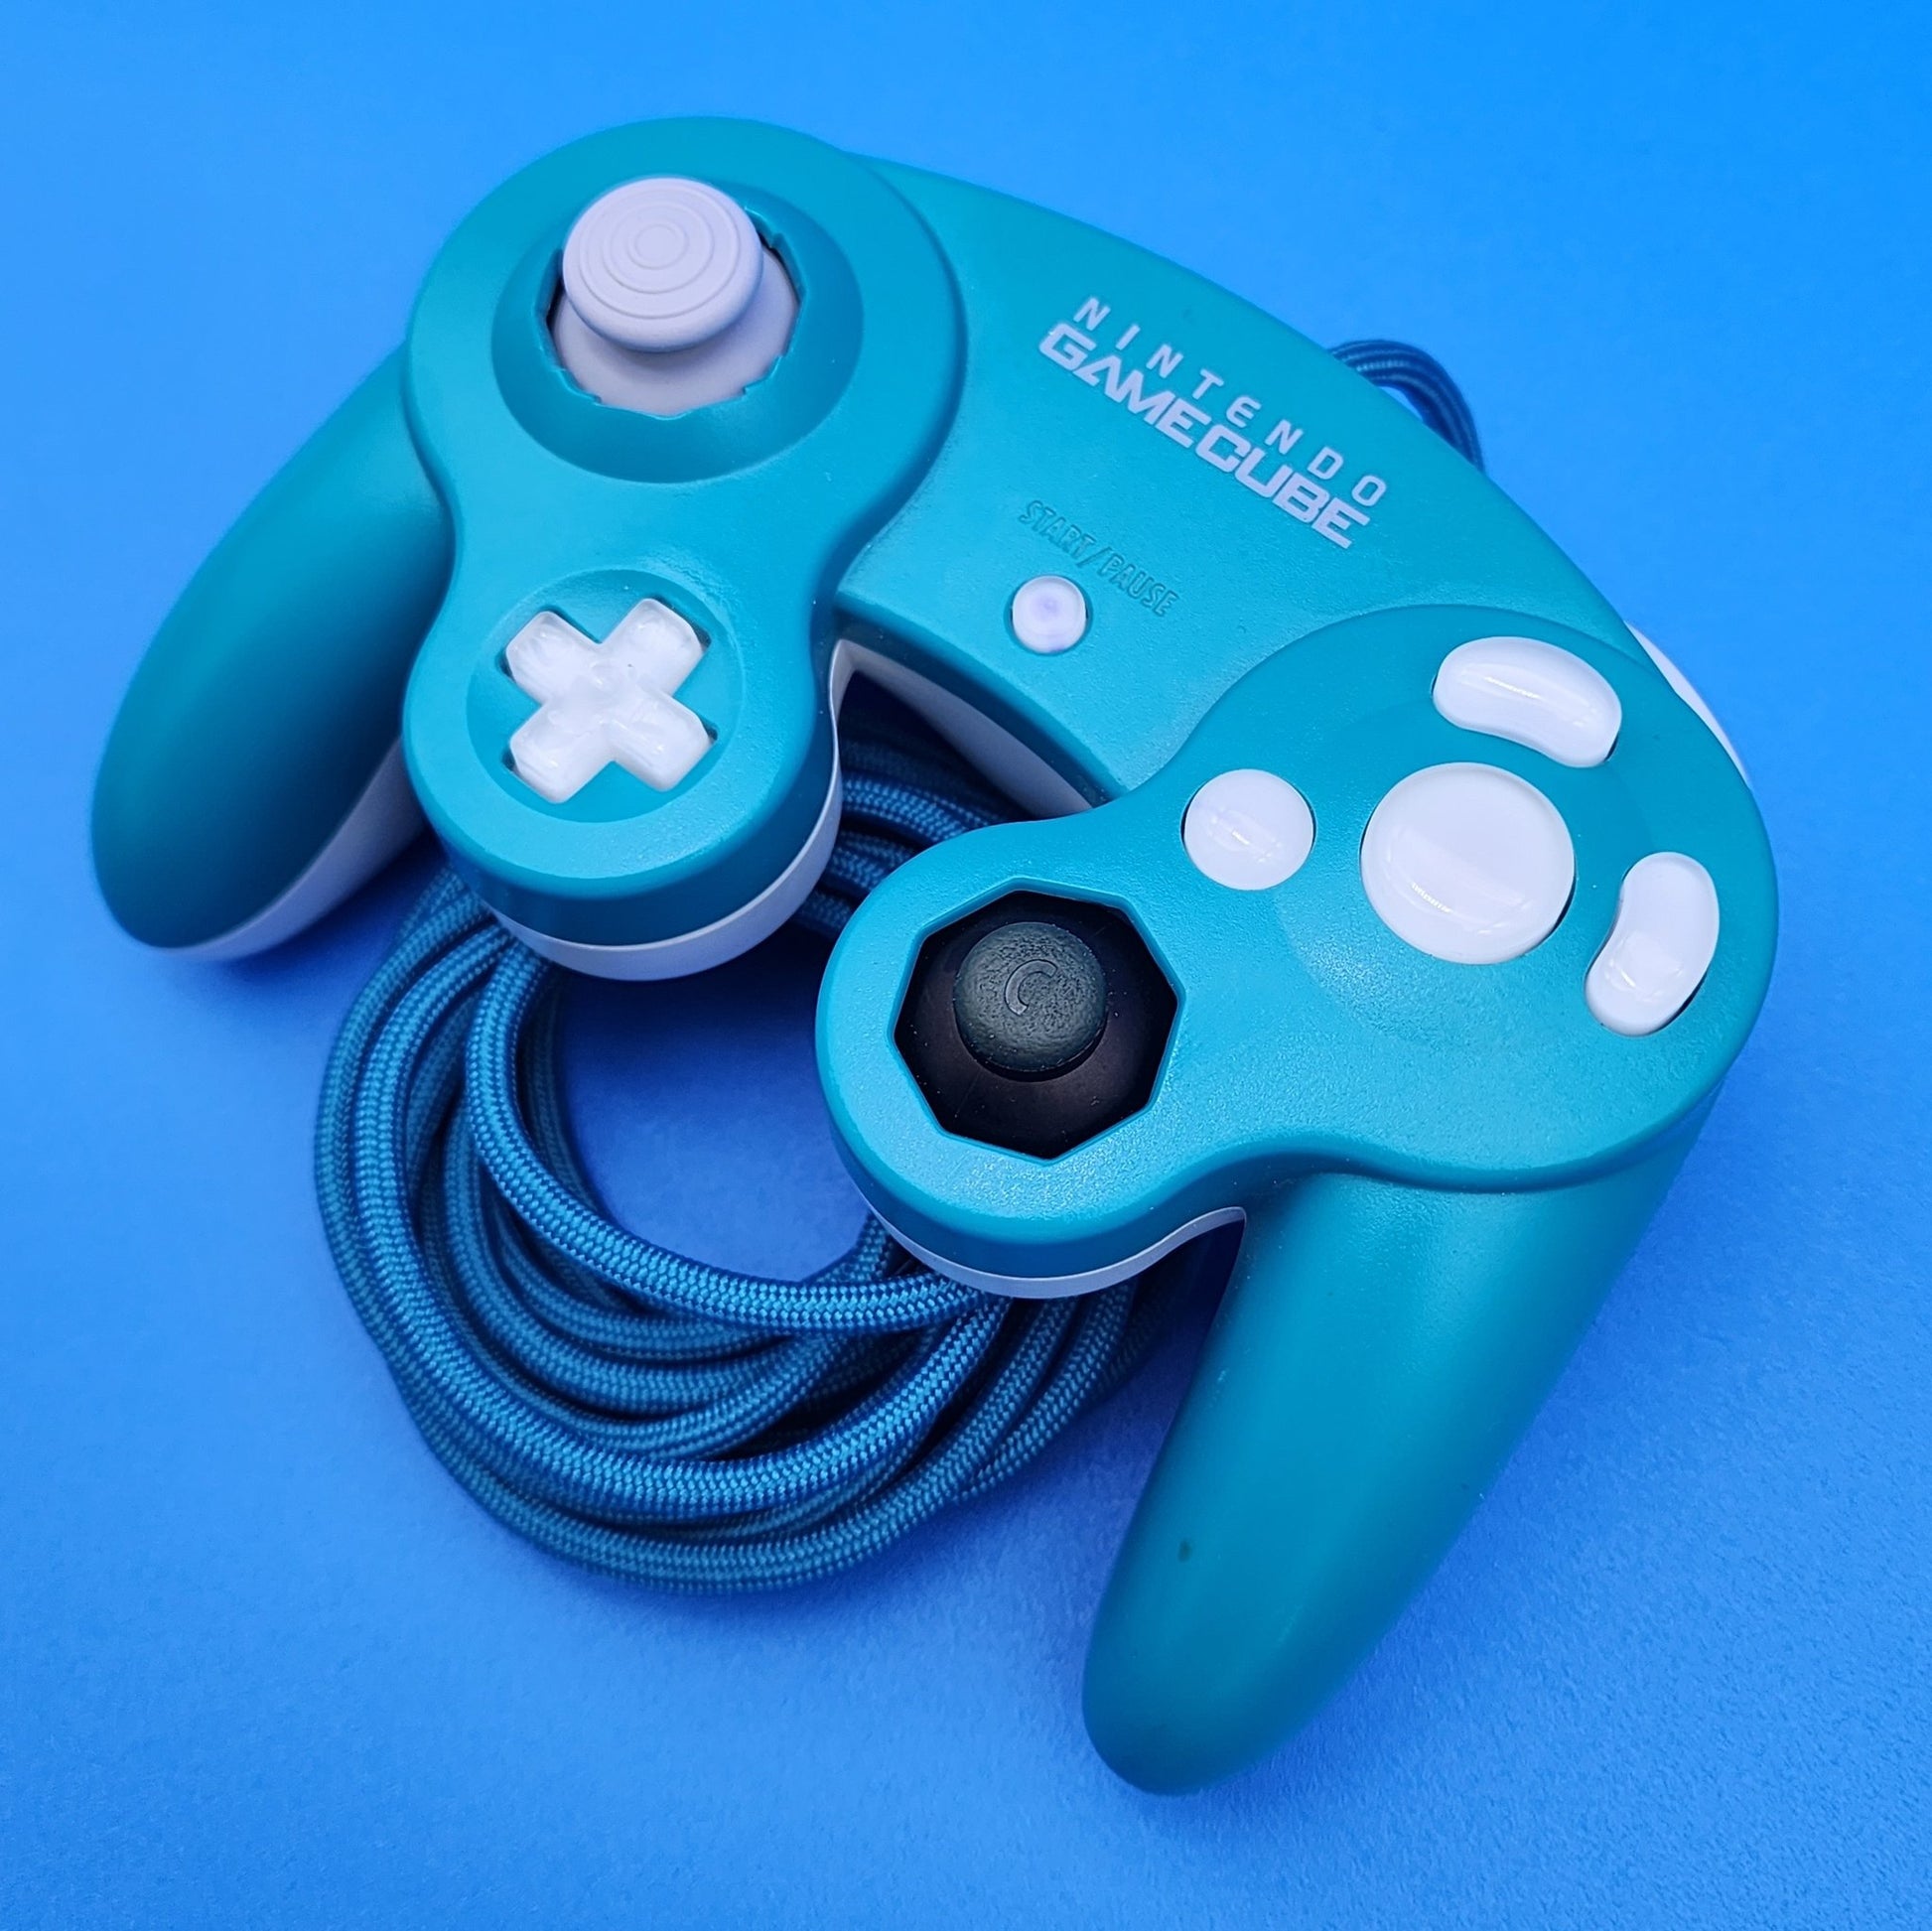 Phob 2.0 Gamecube Controller for Smash Bros. Melee & Ultimate